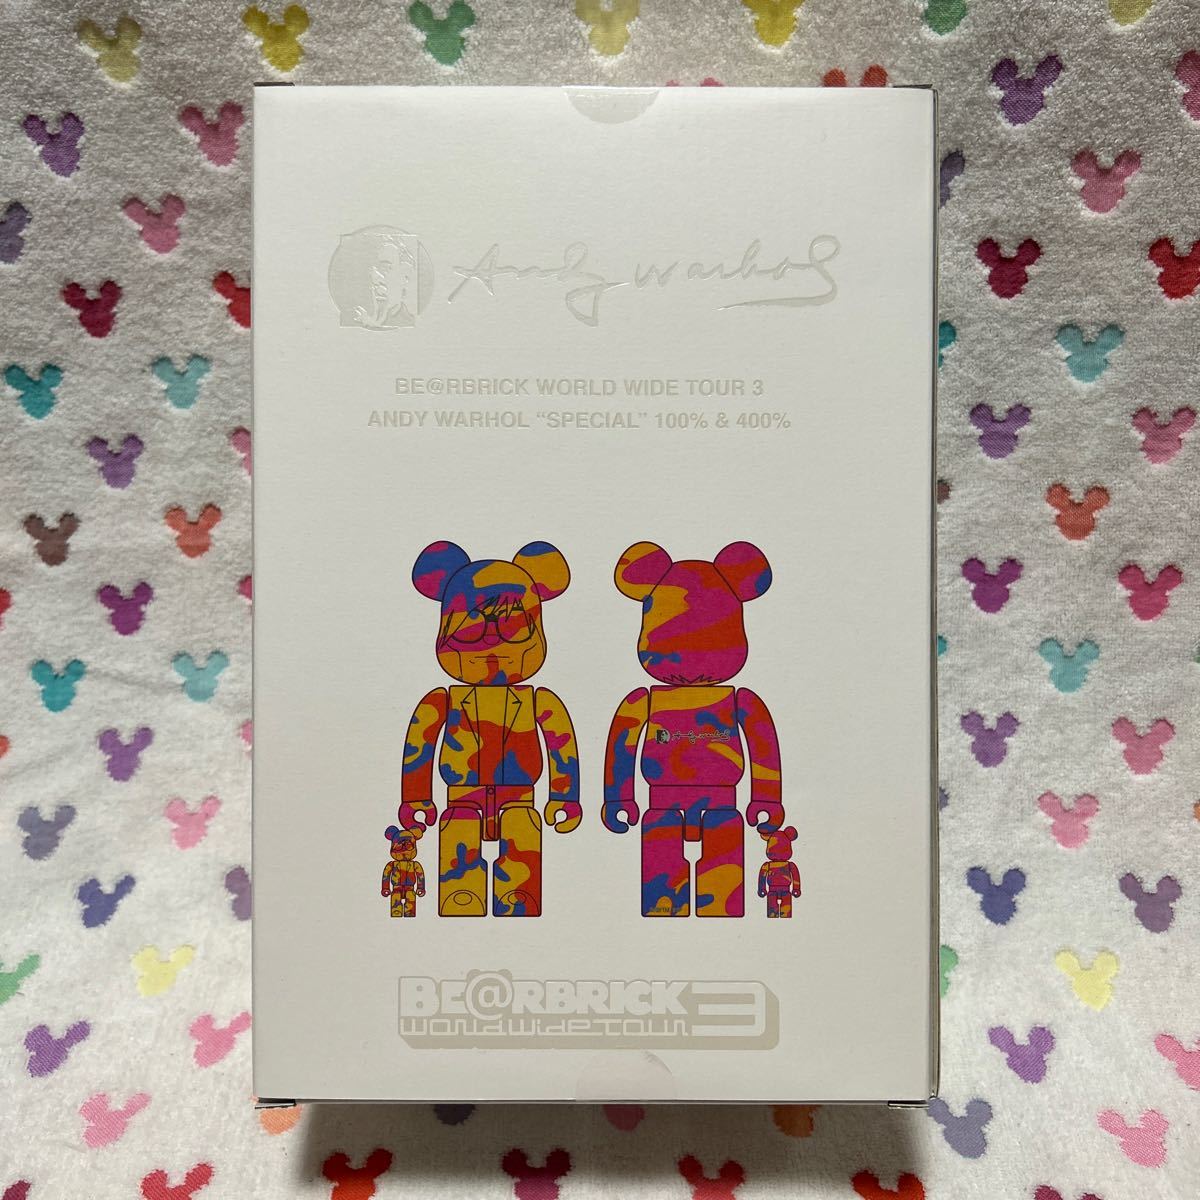 BE@RBRICK ANDY WARHOL SPECIAL 400% 未使用　ベアブリック アンディーウォーホル_画像4